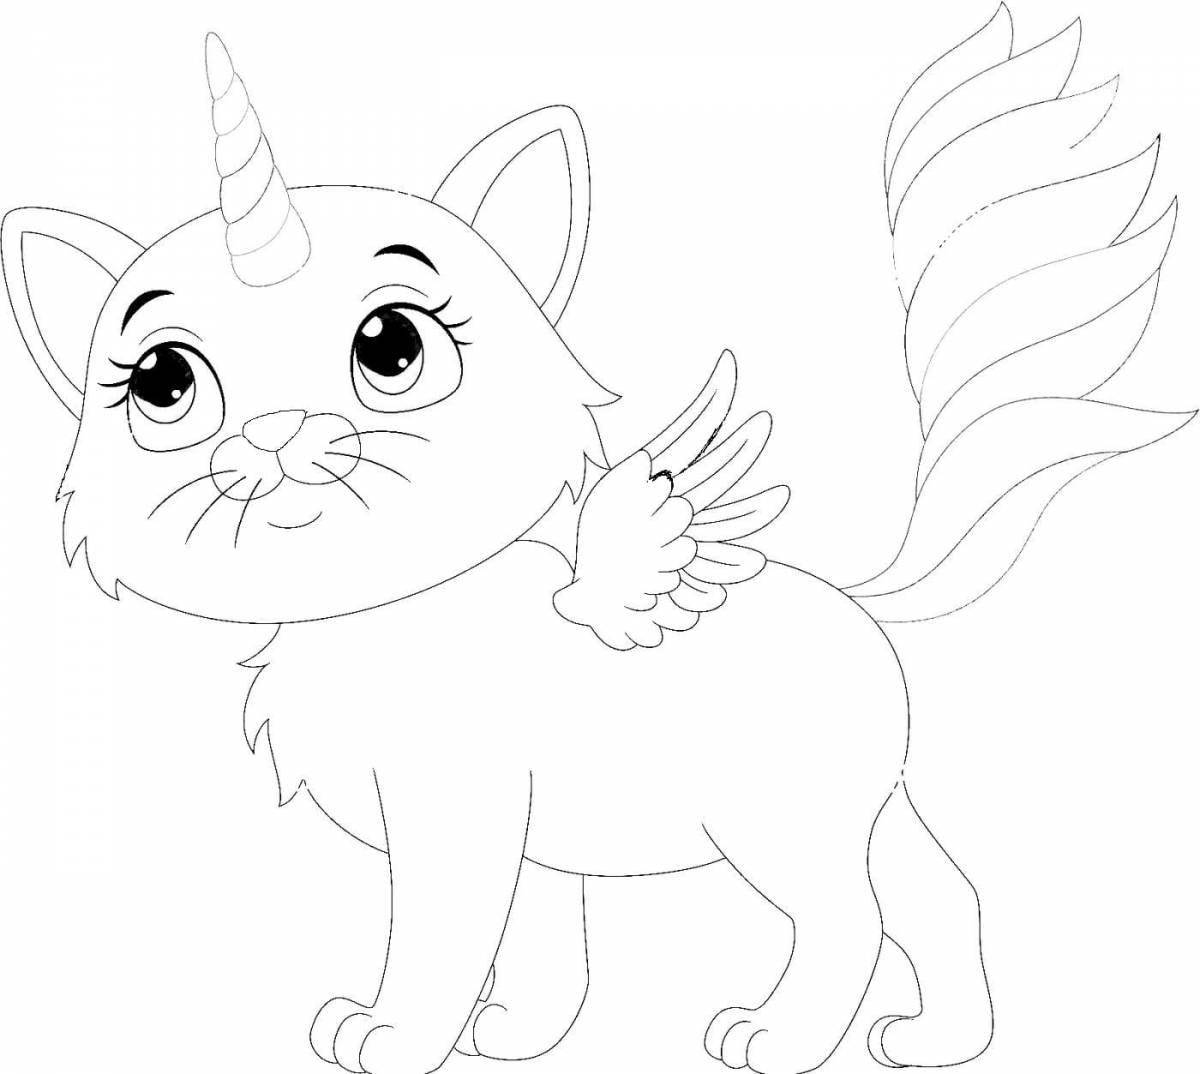 Awesome unicorn cat coloring book